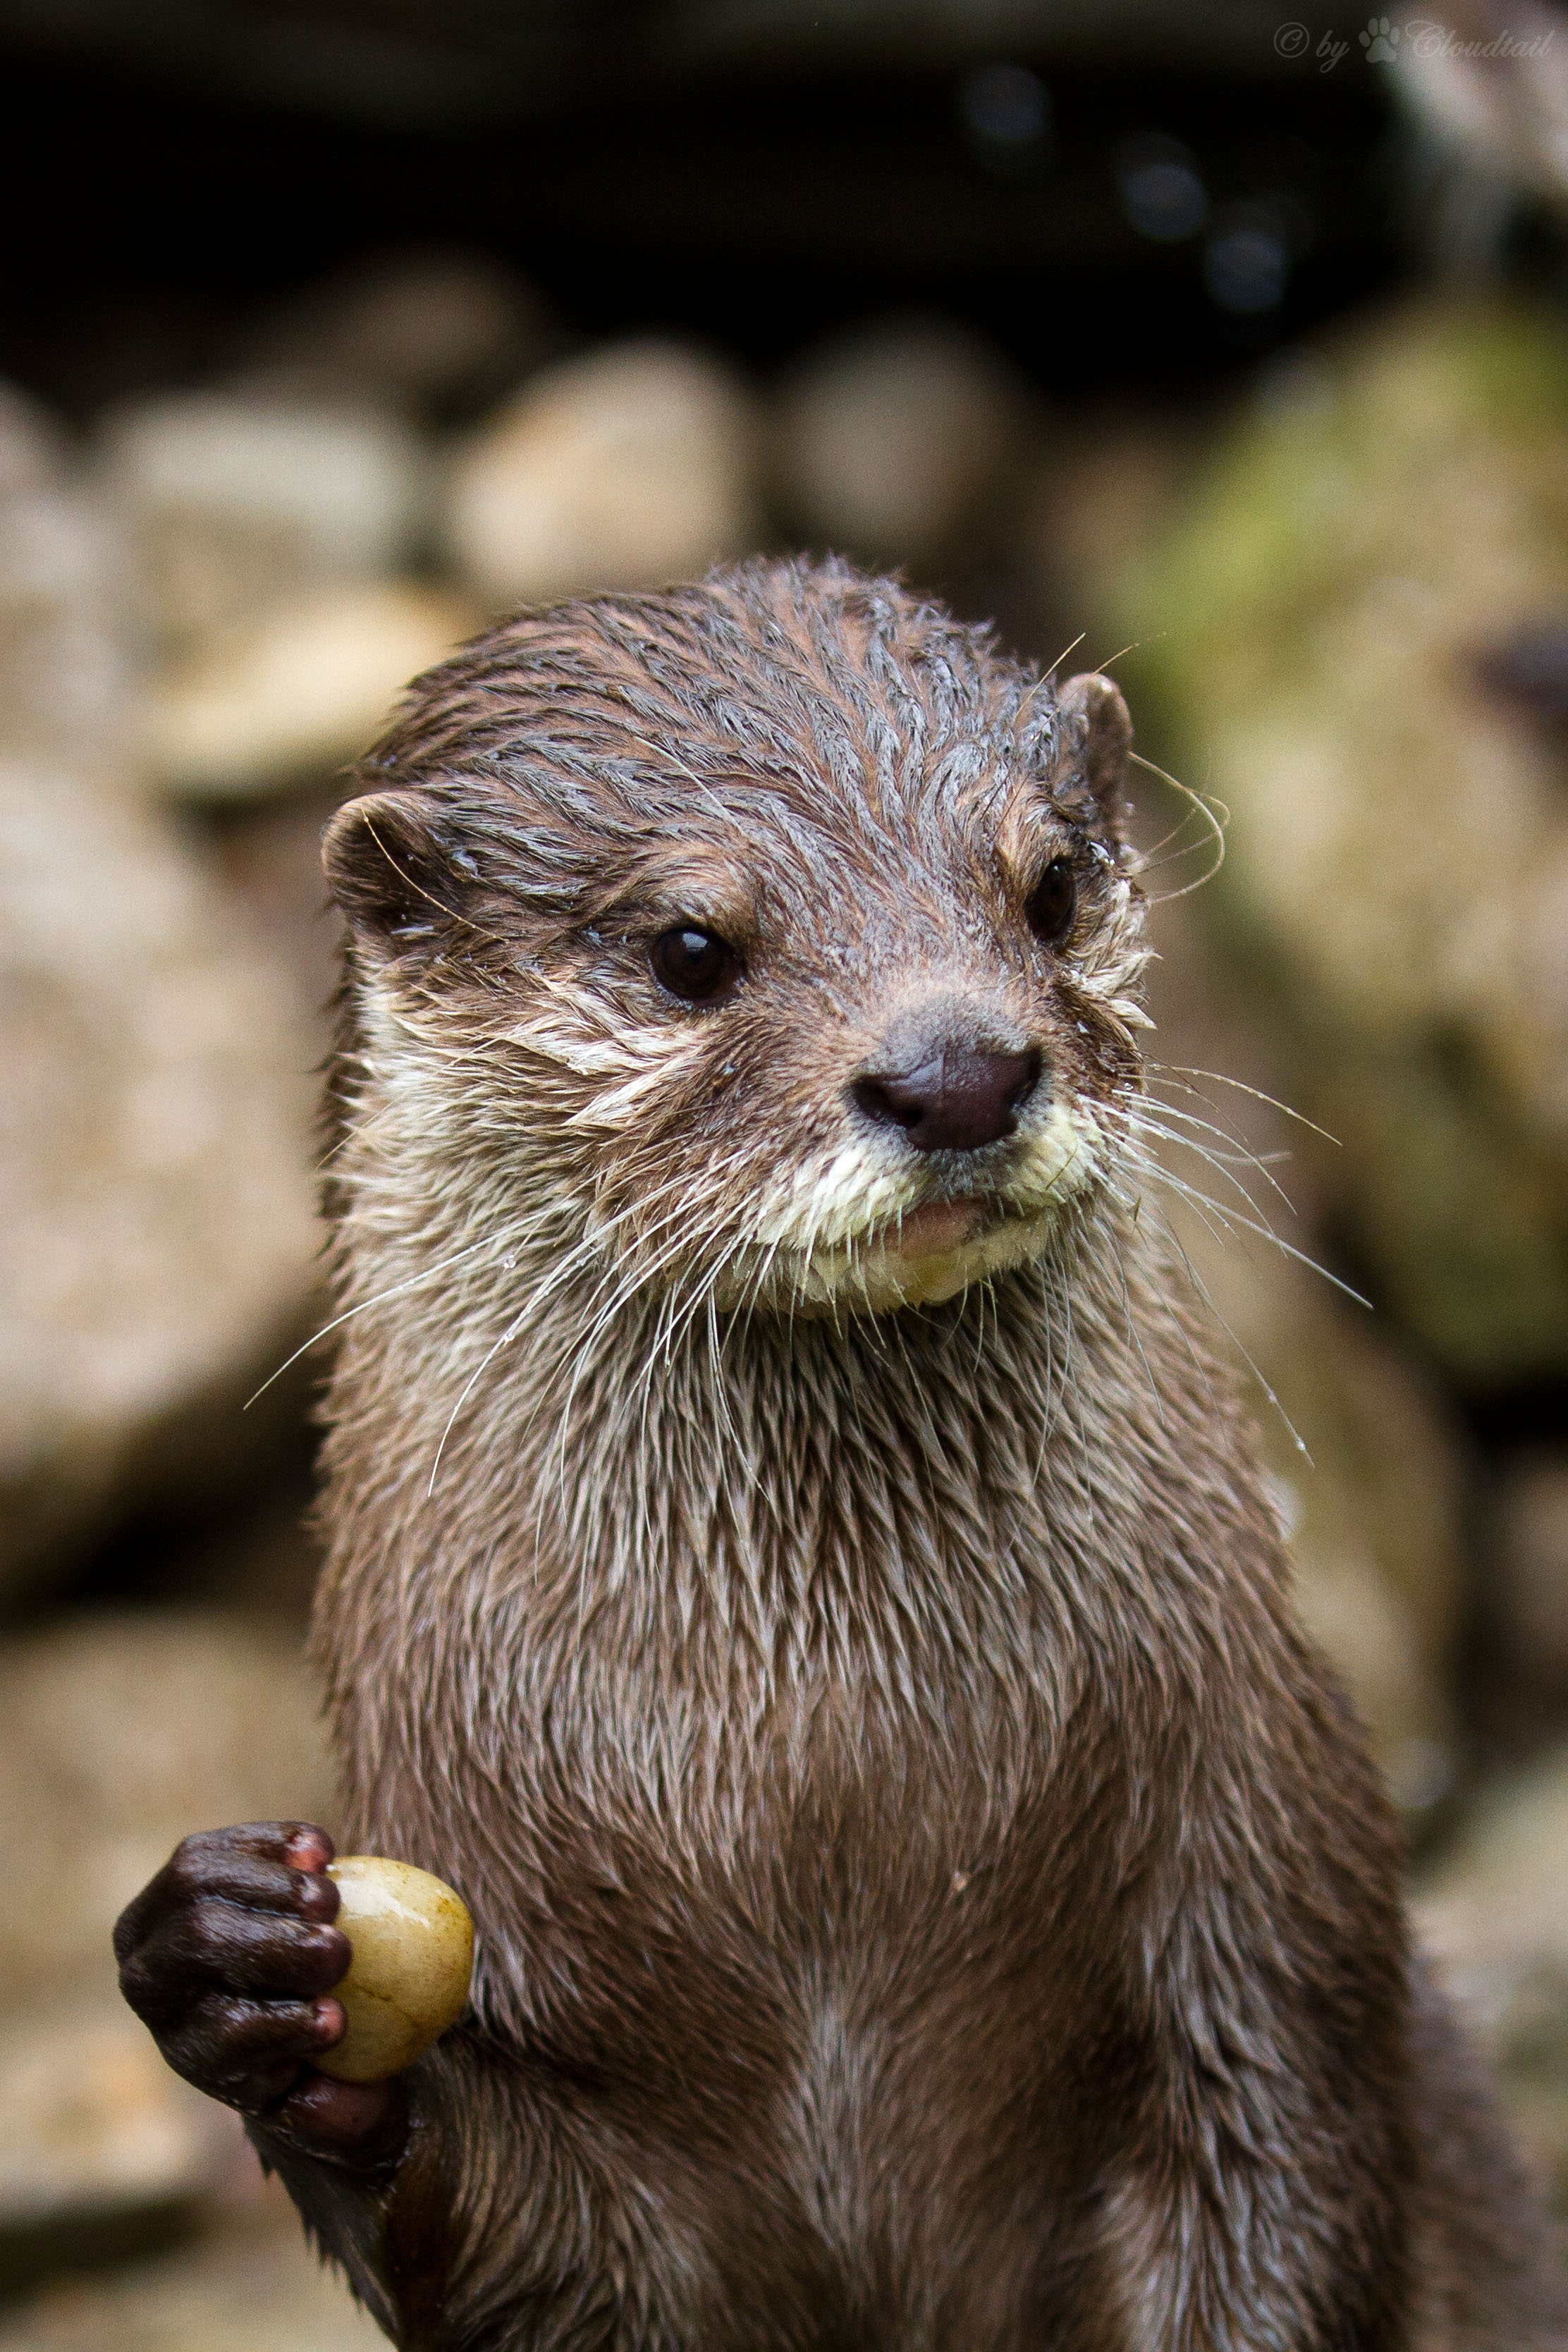 Otter Is Momentarily Distracted from His Stone